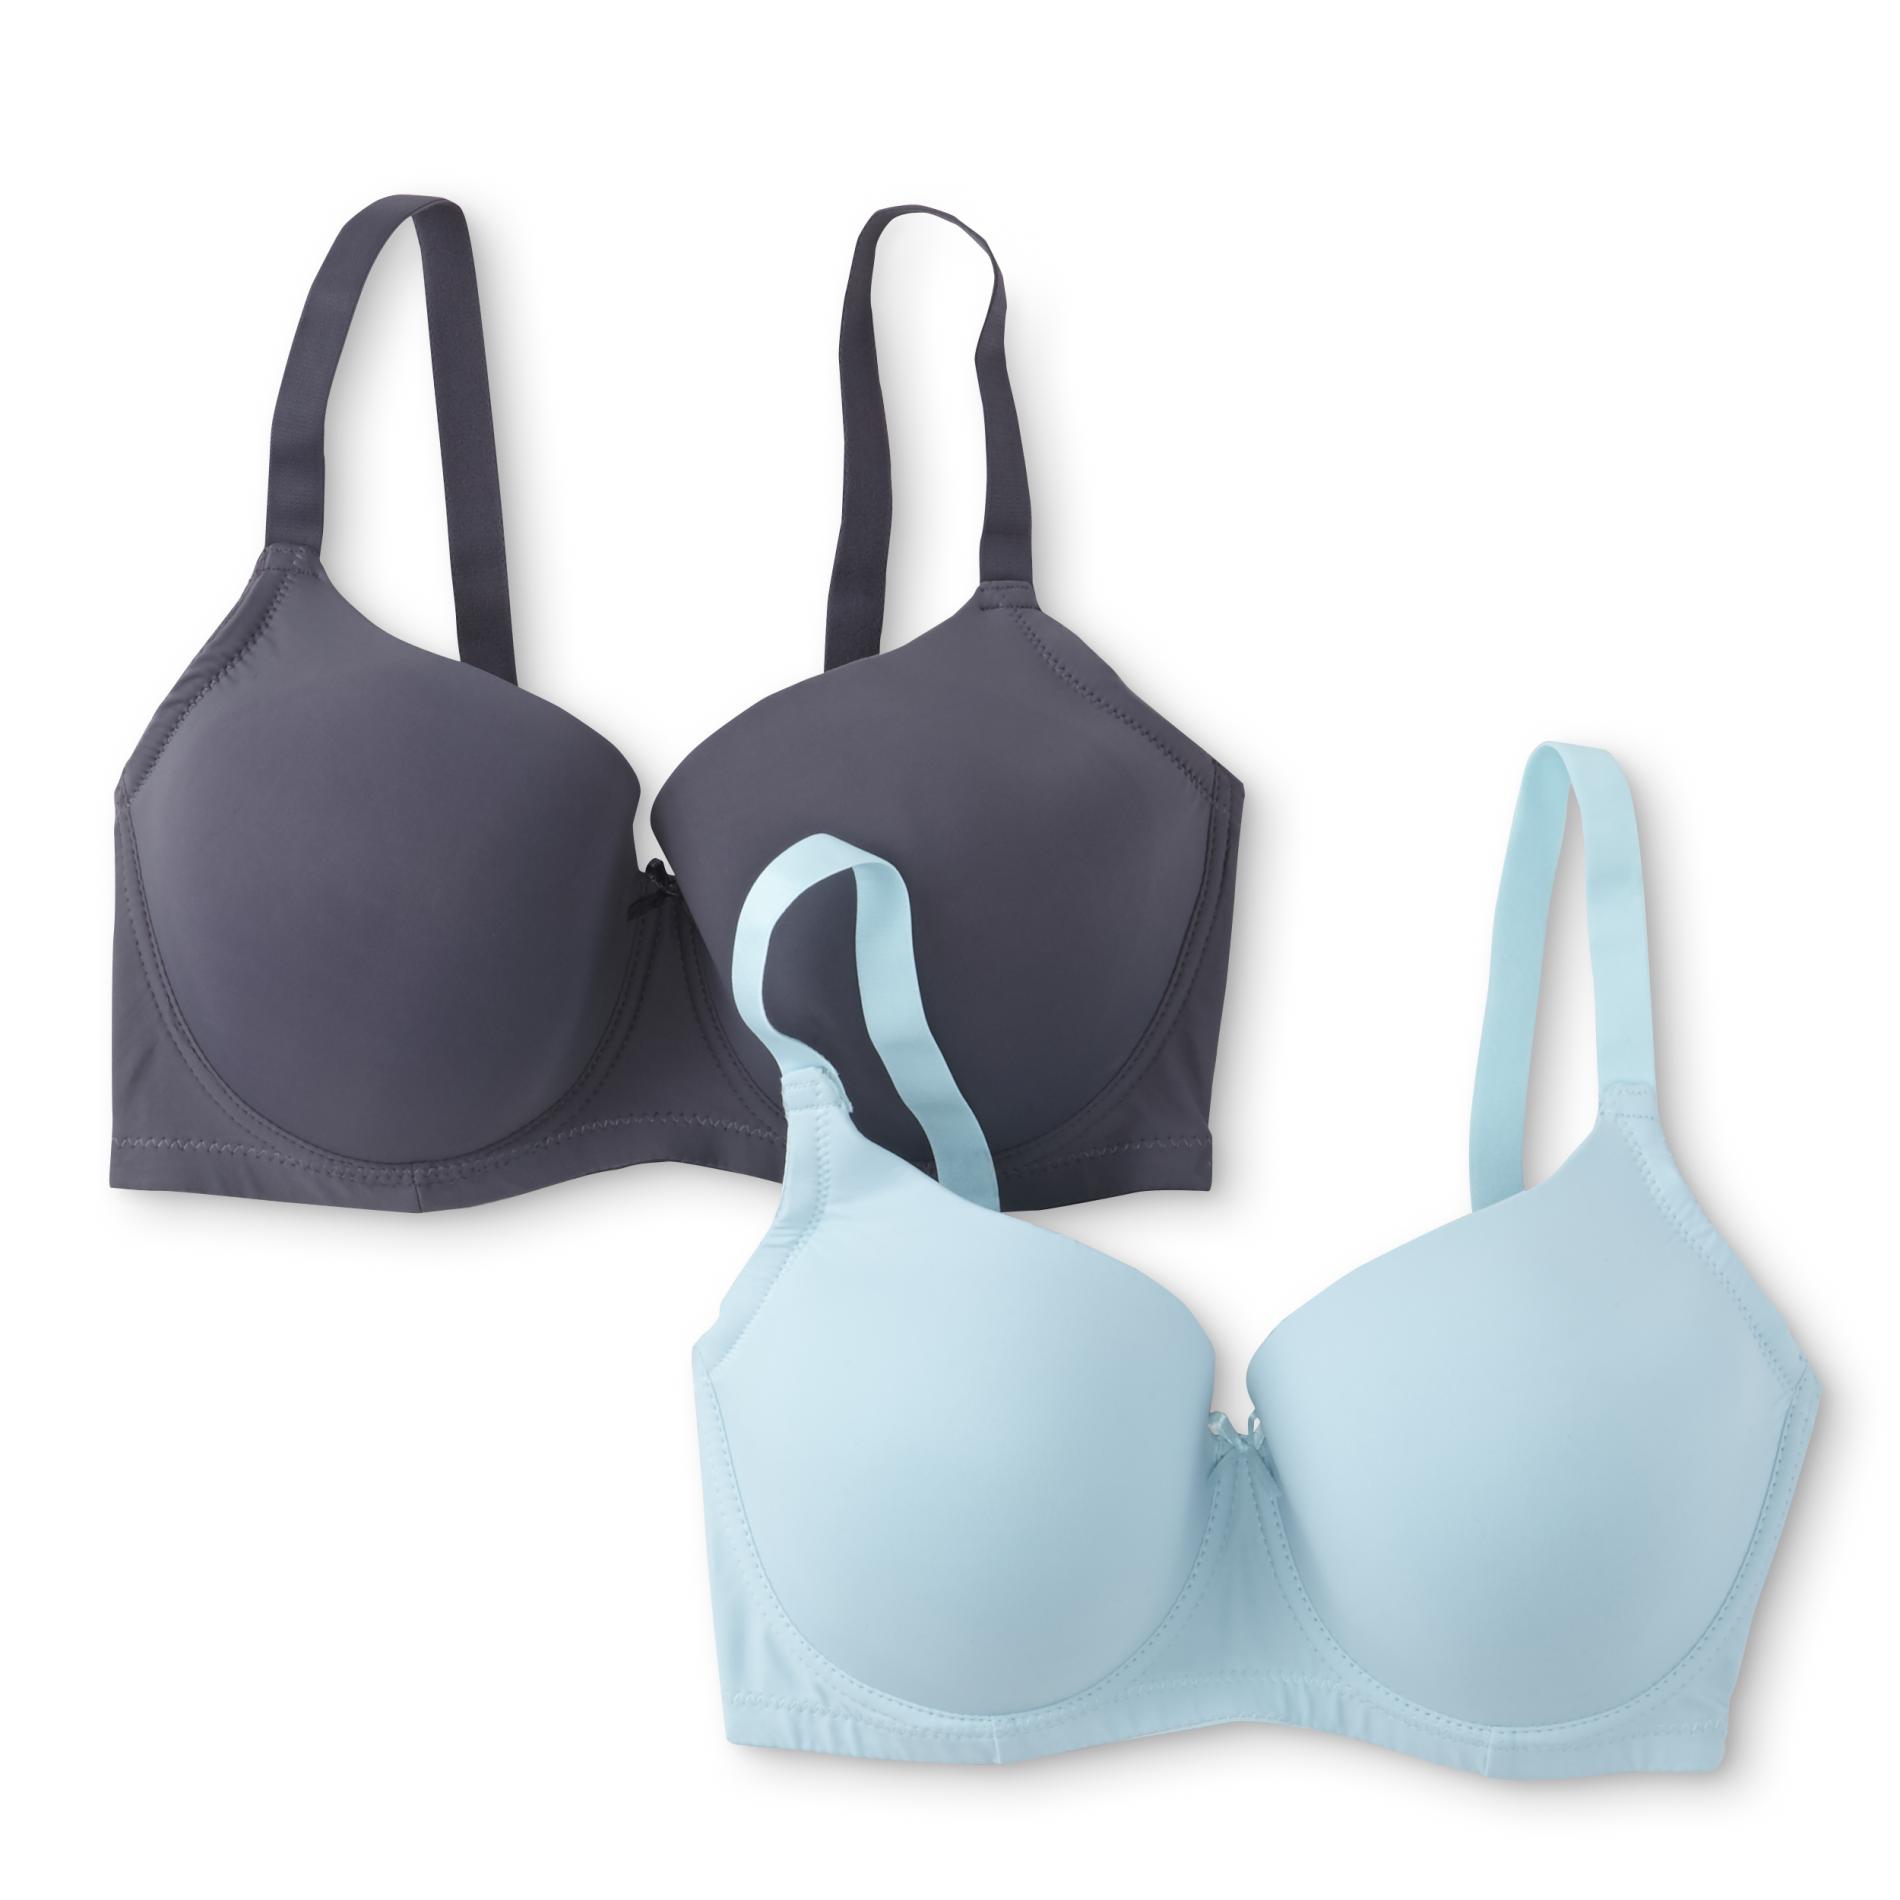 Simply Emma Women's Plus 2-Pack Smoothing T-Shirt Bras